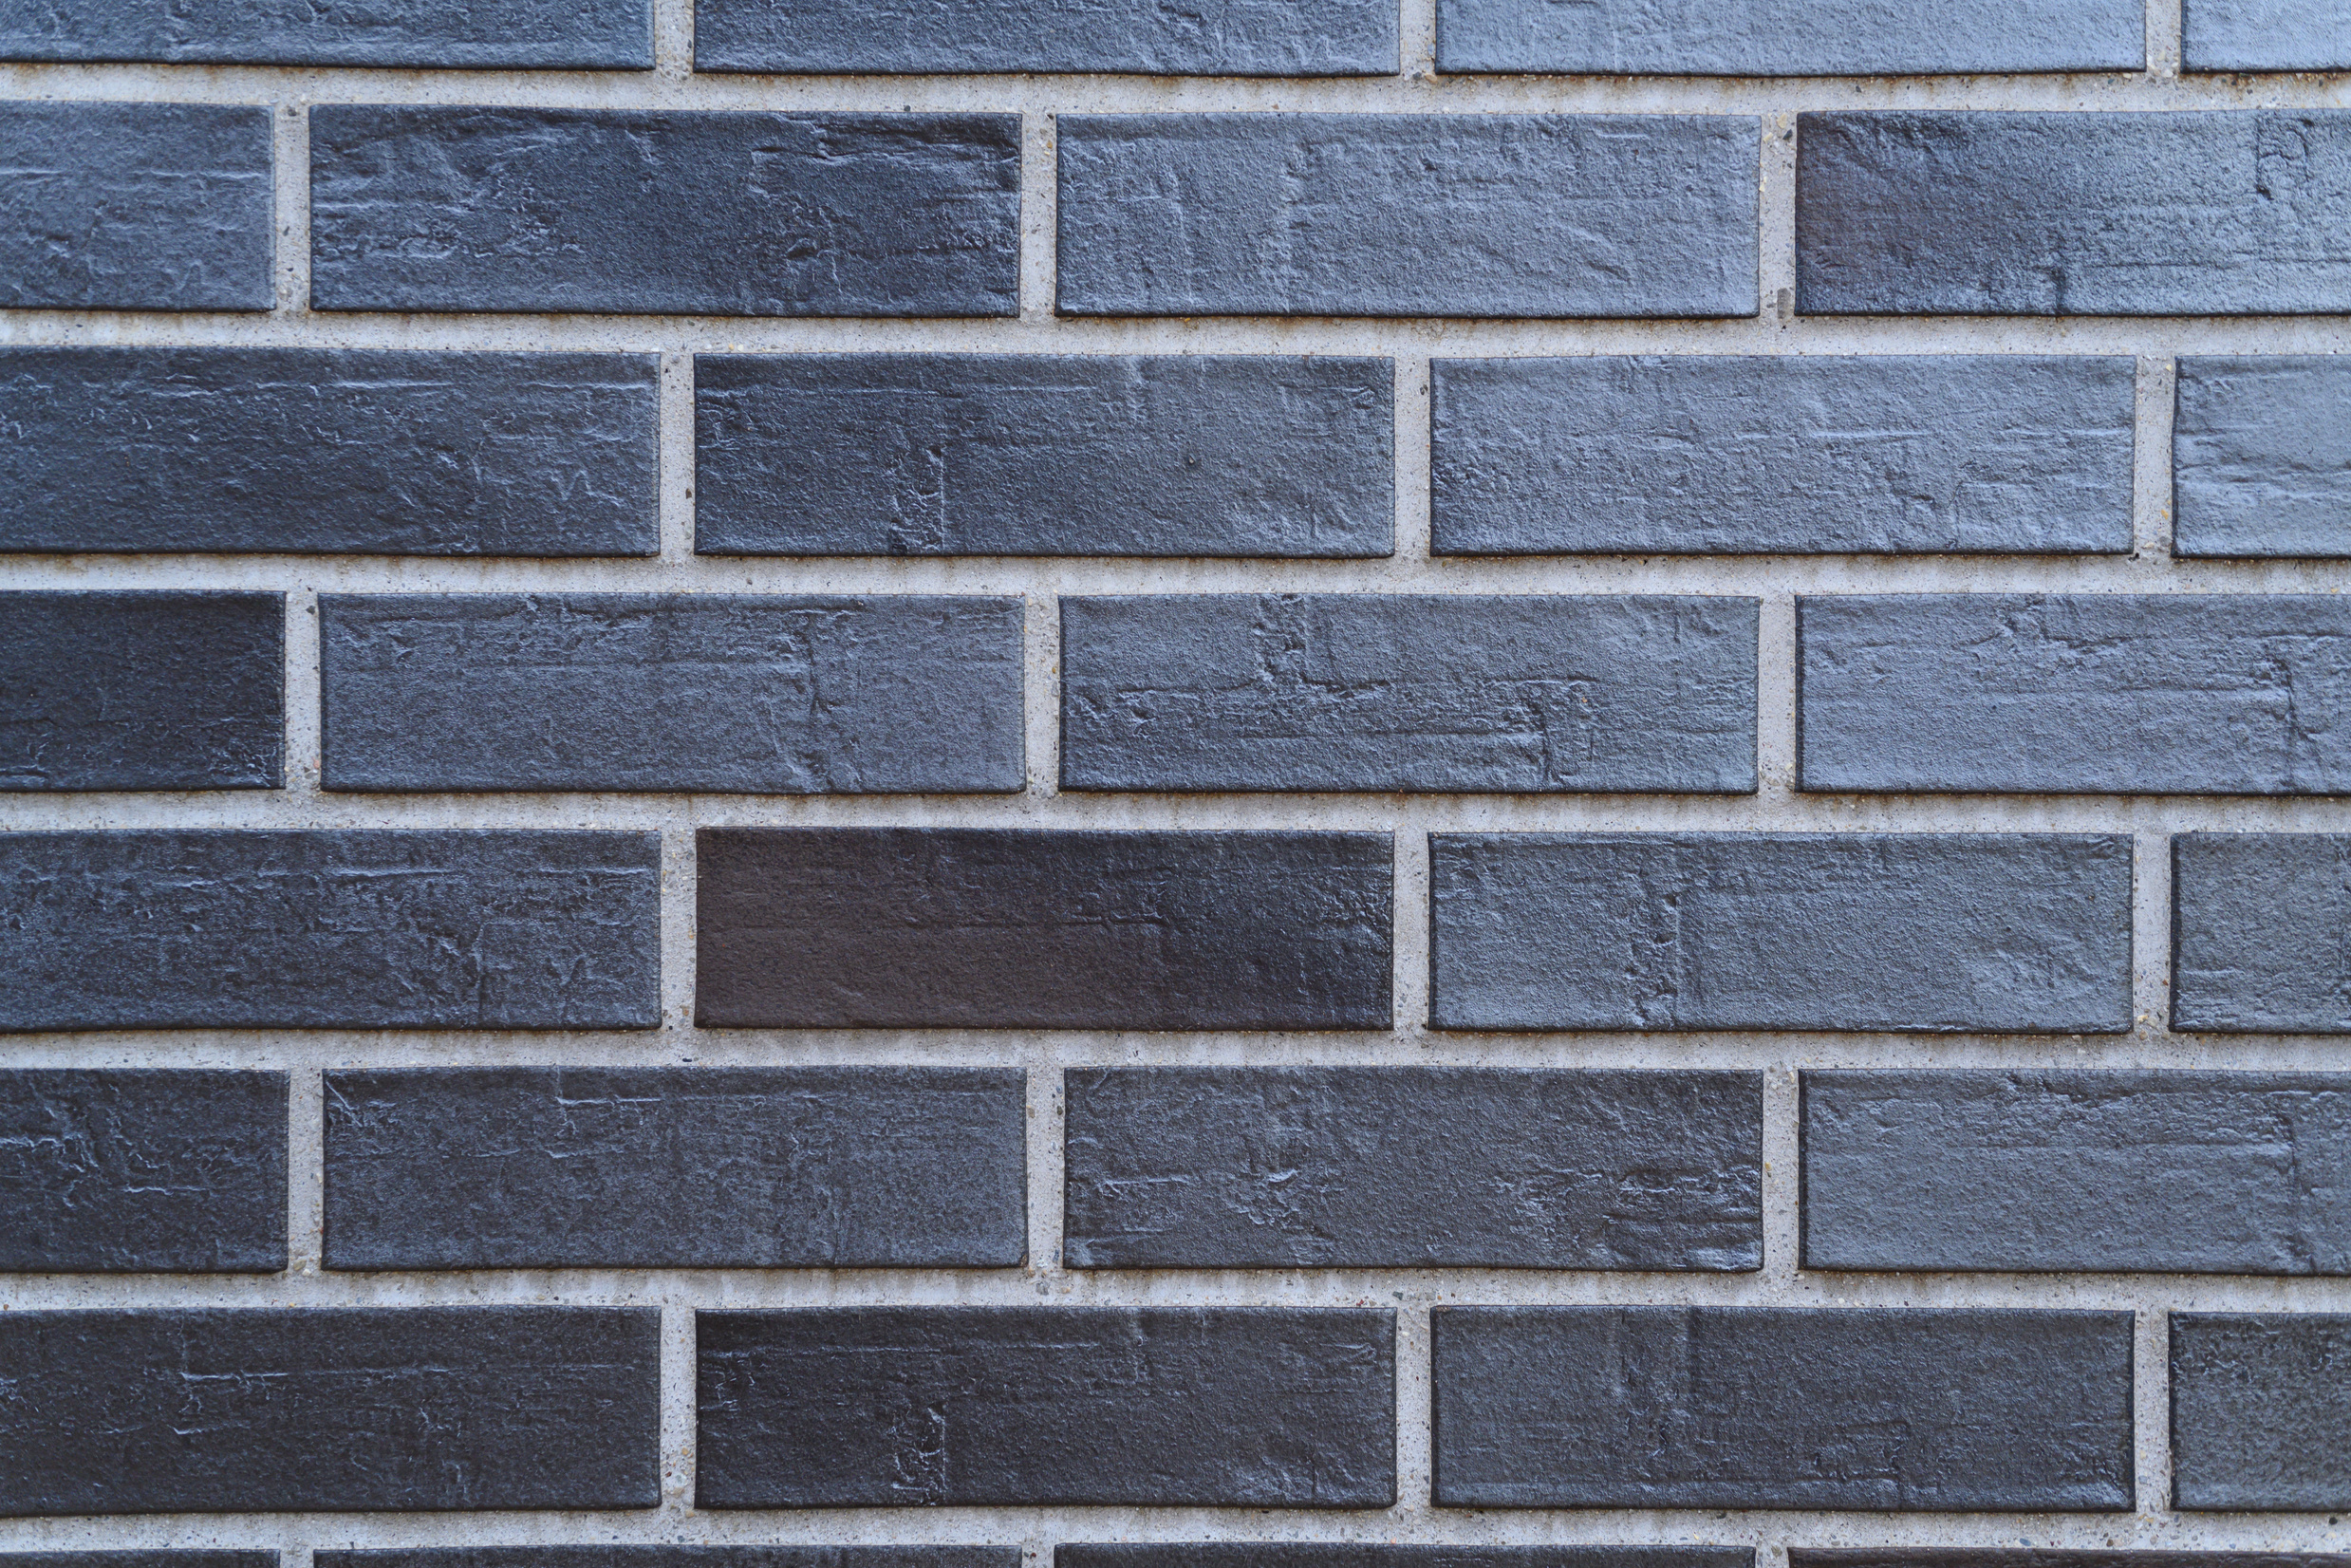 Bricks walls as Textures or Backgrounds for Pictures